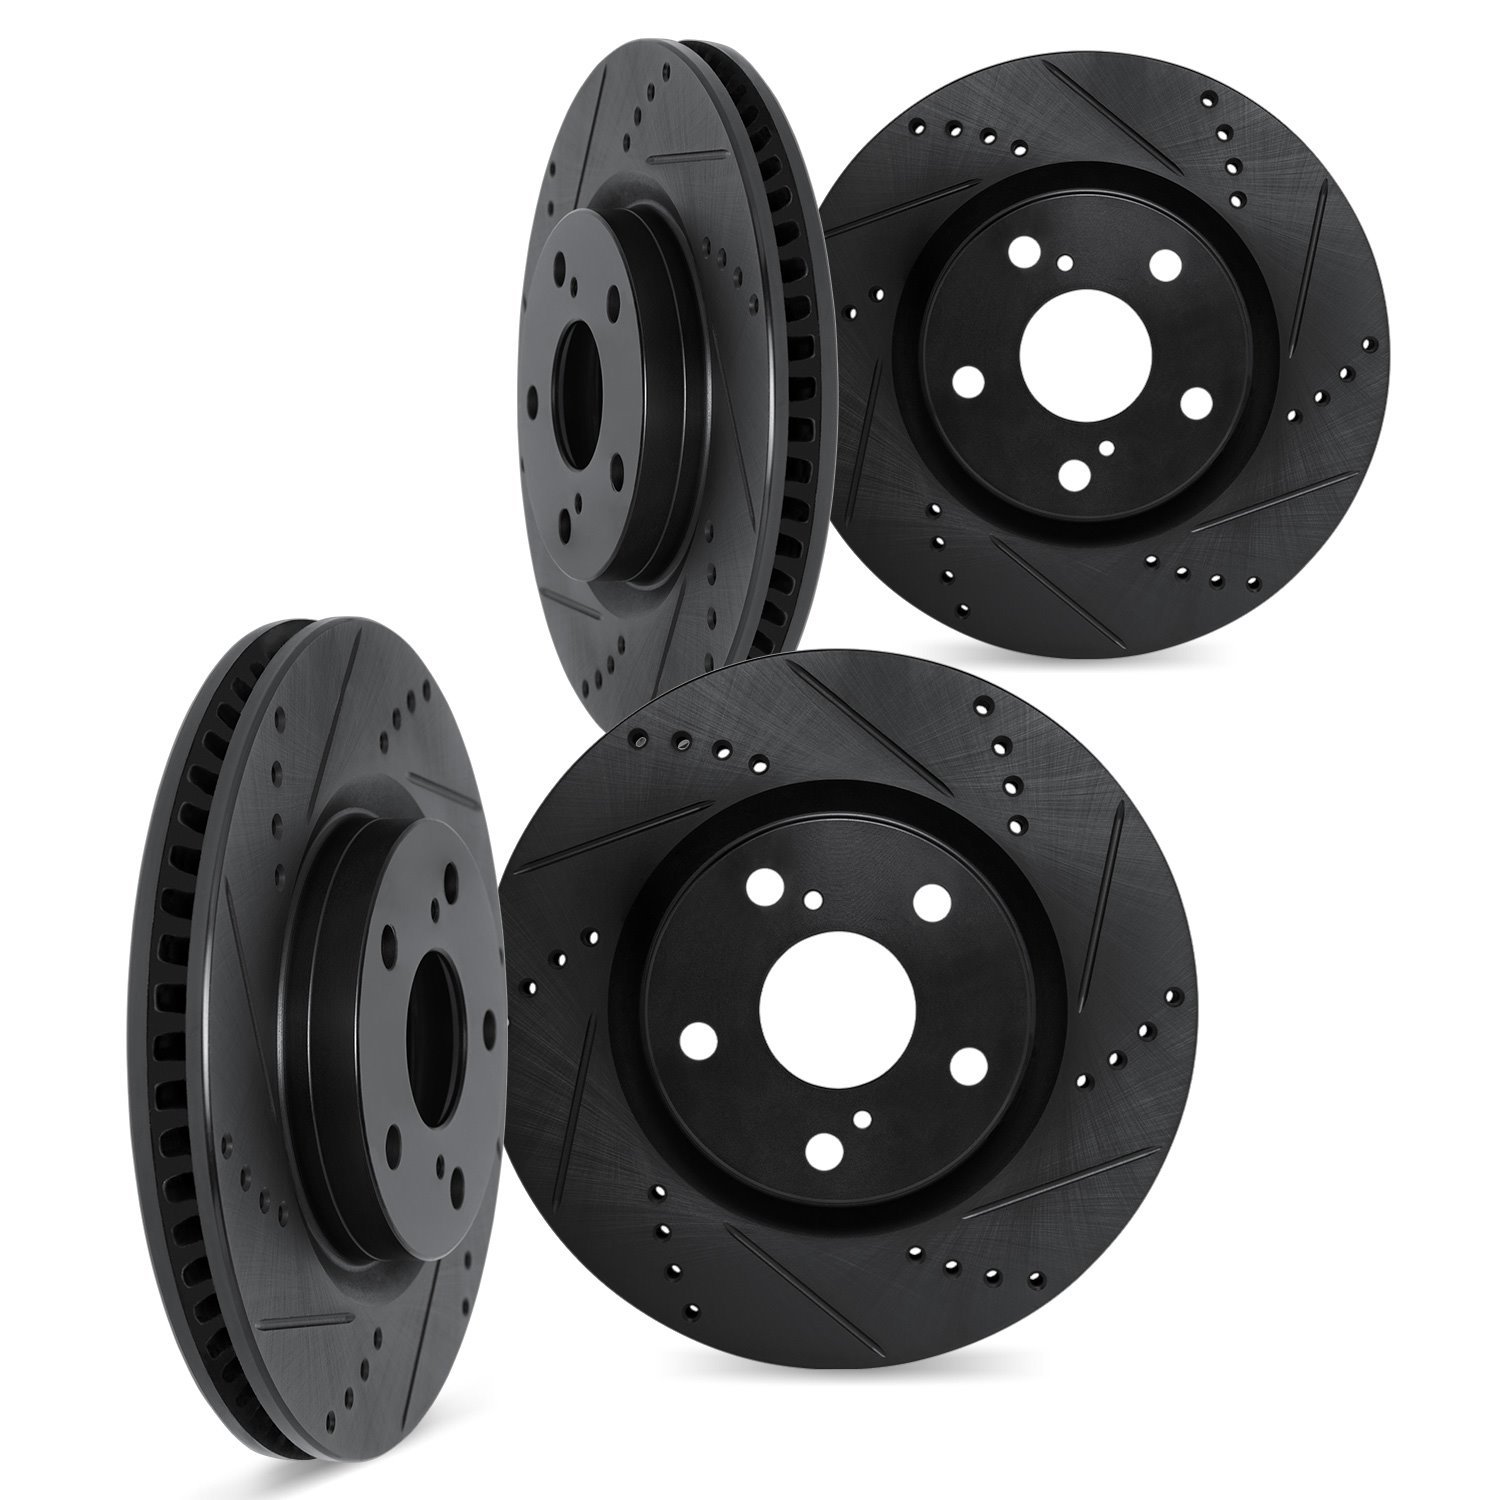 8004-02019 Drilled/Slotted Brake Rotors [Black], 1989-1991 Porsche, Position: Front and Rear